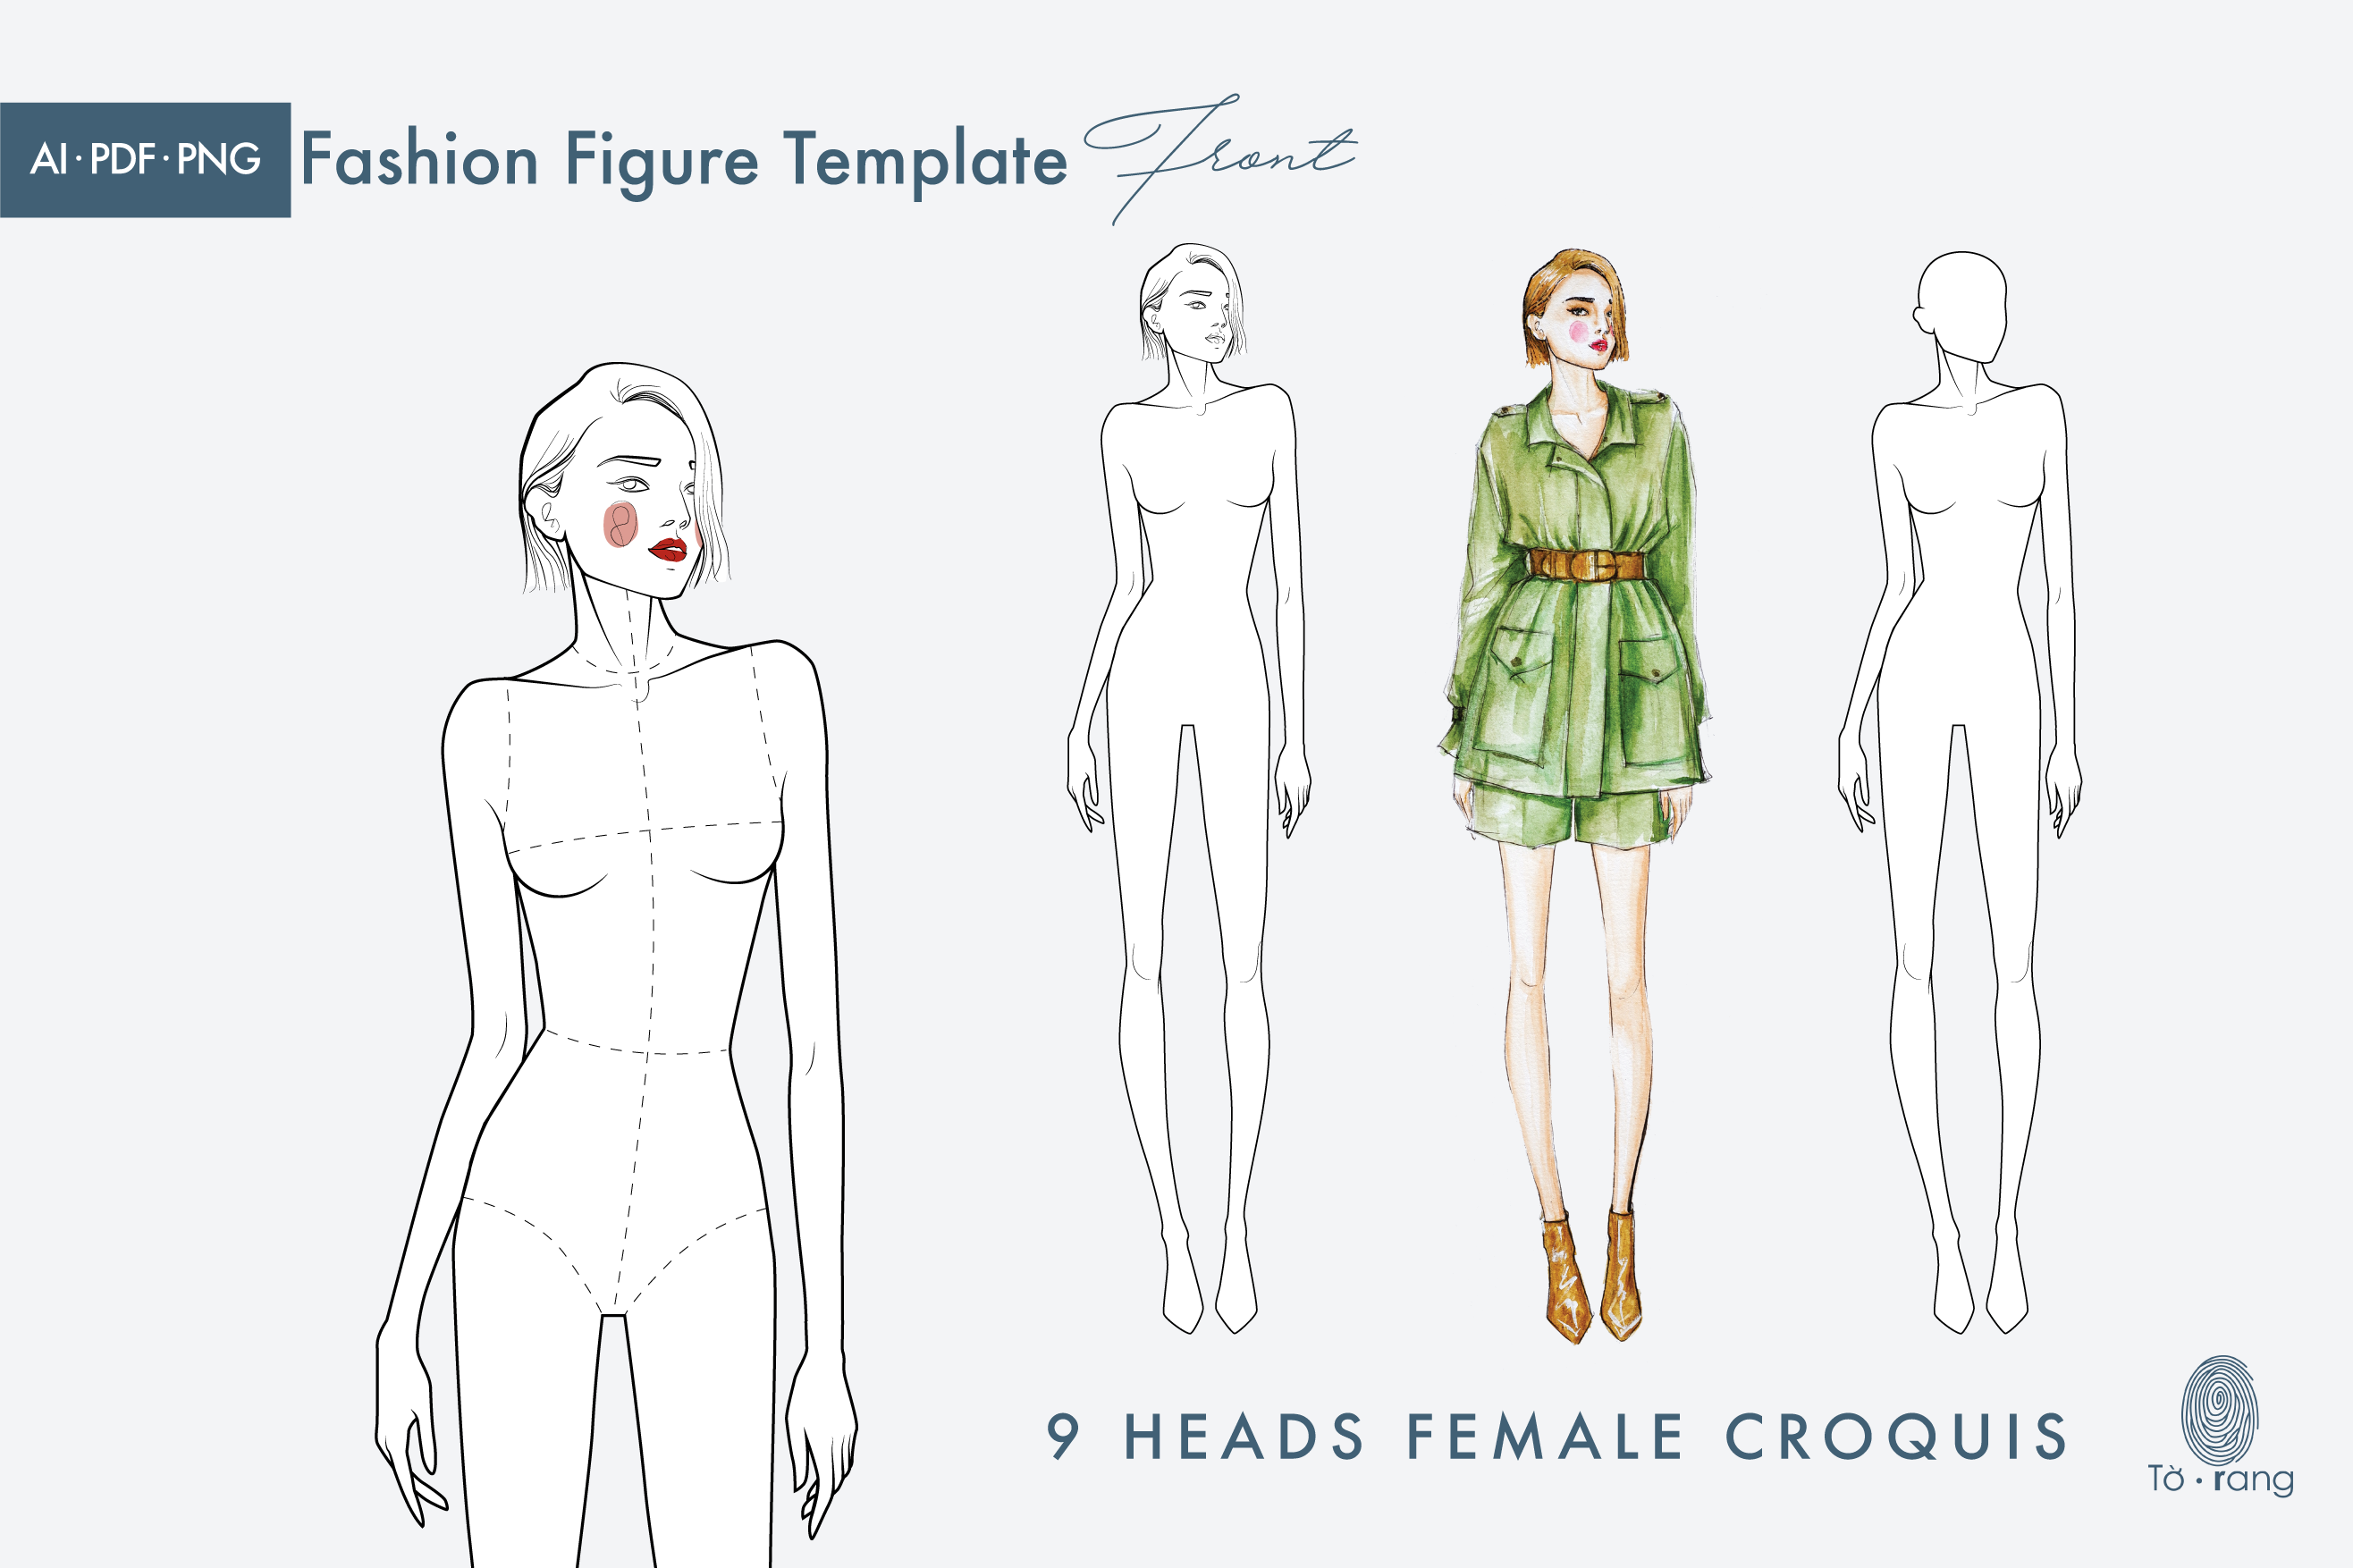 Procreate Stamps 1950s VINTAGE FASHION POSES Fashion Figure Template.  Digital Brushes for Procreate. 10 Female Croquis Model Pose Stamps. - Etsy